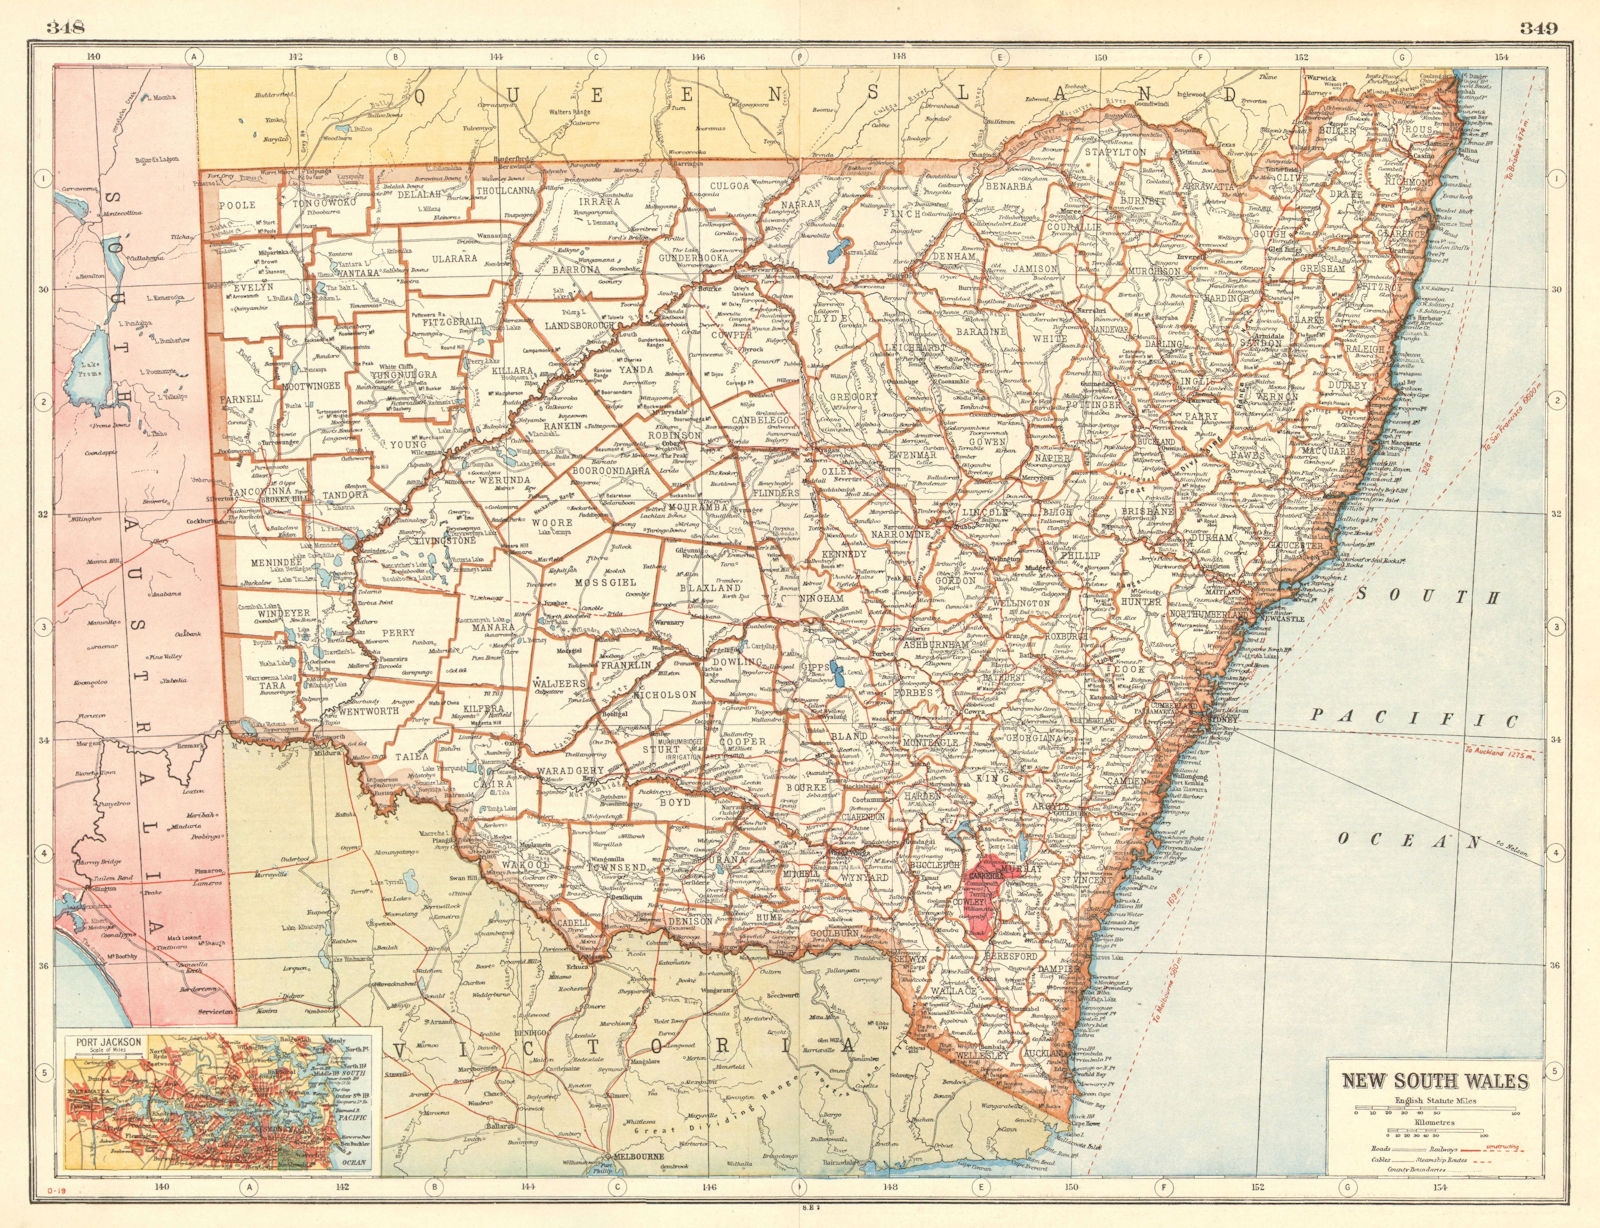 NEW SOUTH WALES. Counties Railways. Sydney plan.Commonwealth Territory 1920 map